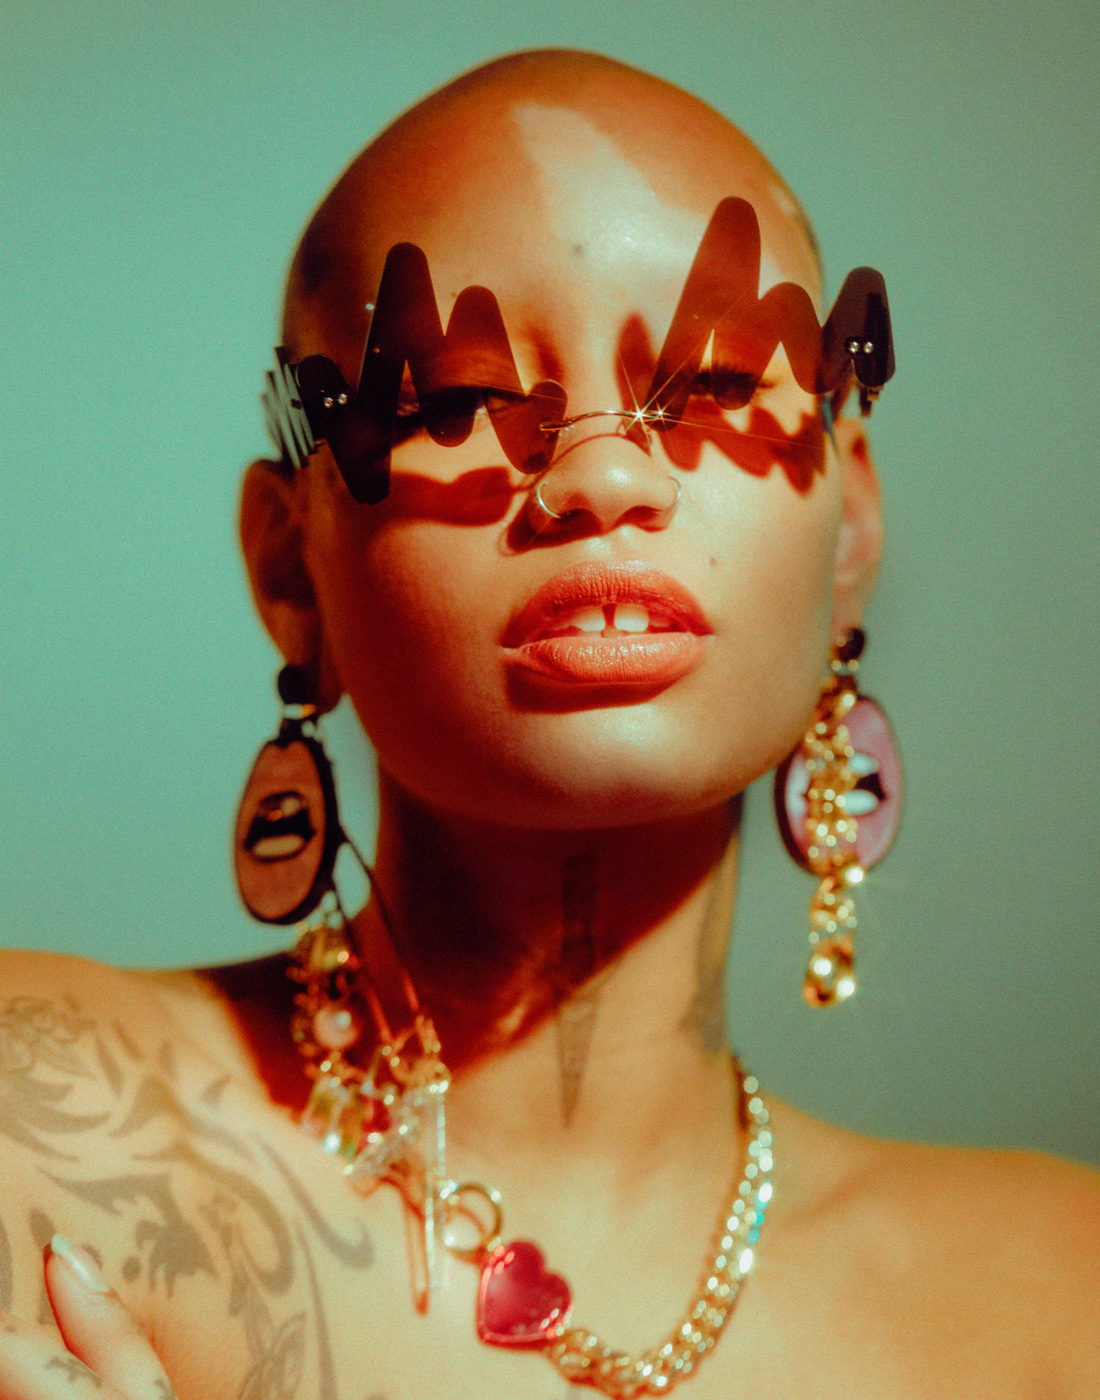 LADYGUNN – BEAM ME UP: ISLYNYC TAKES US TO ANOTHER WORLD OF INSPIRATION